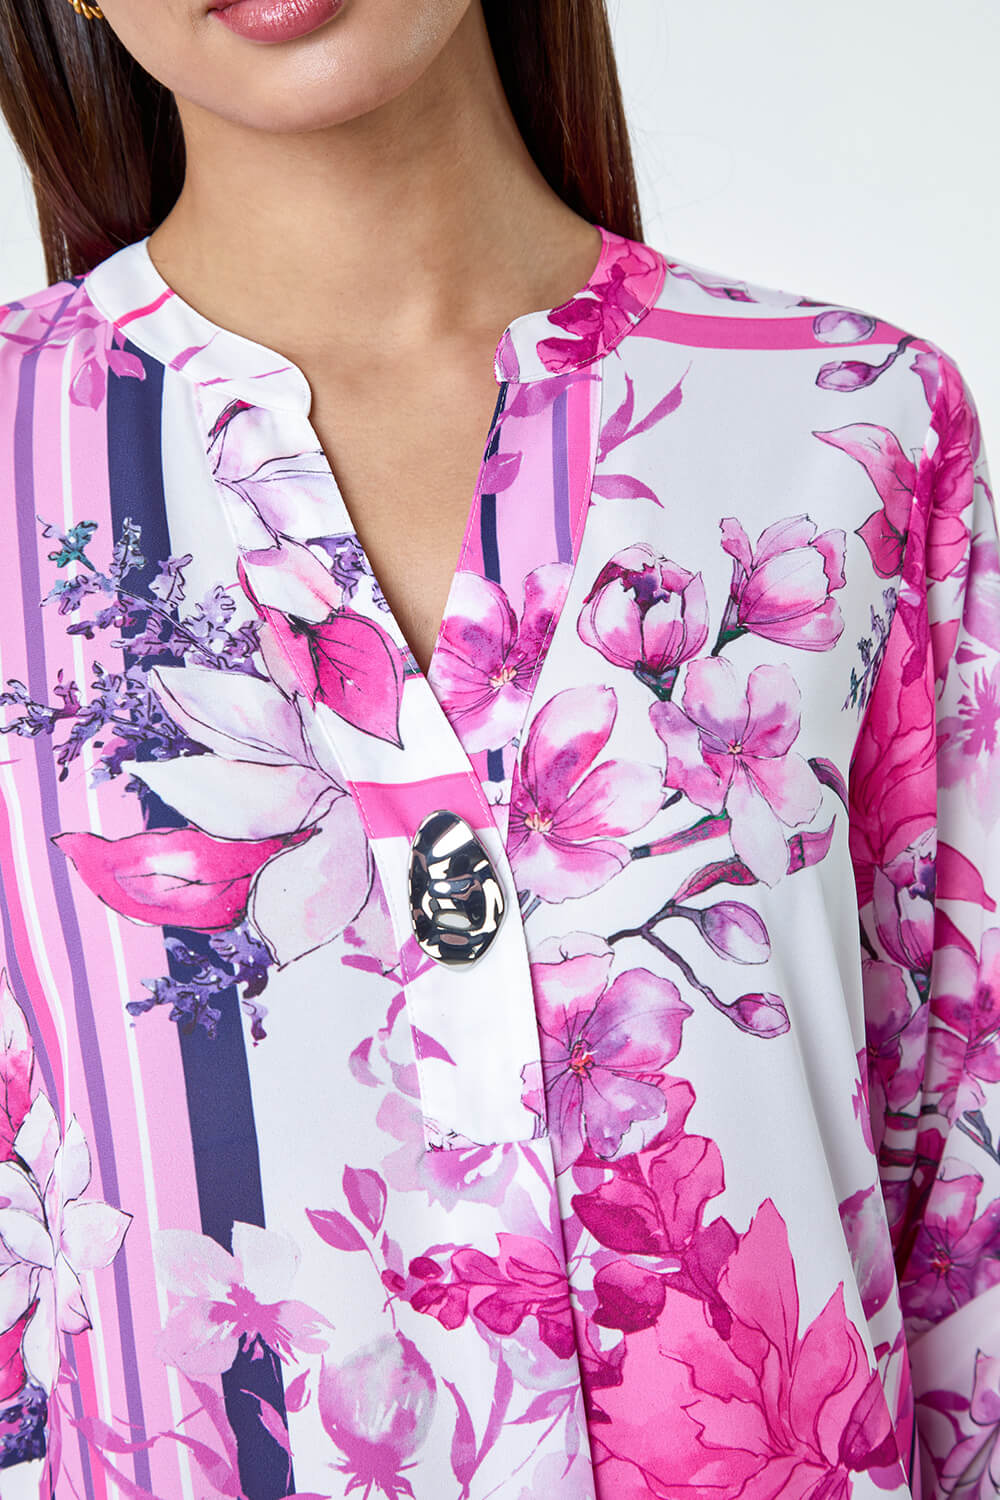 PINK Floral Patchwork Longline Button Detail Top, Image 5 of 5